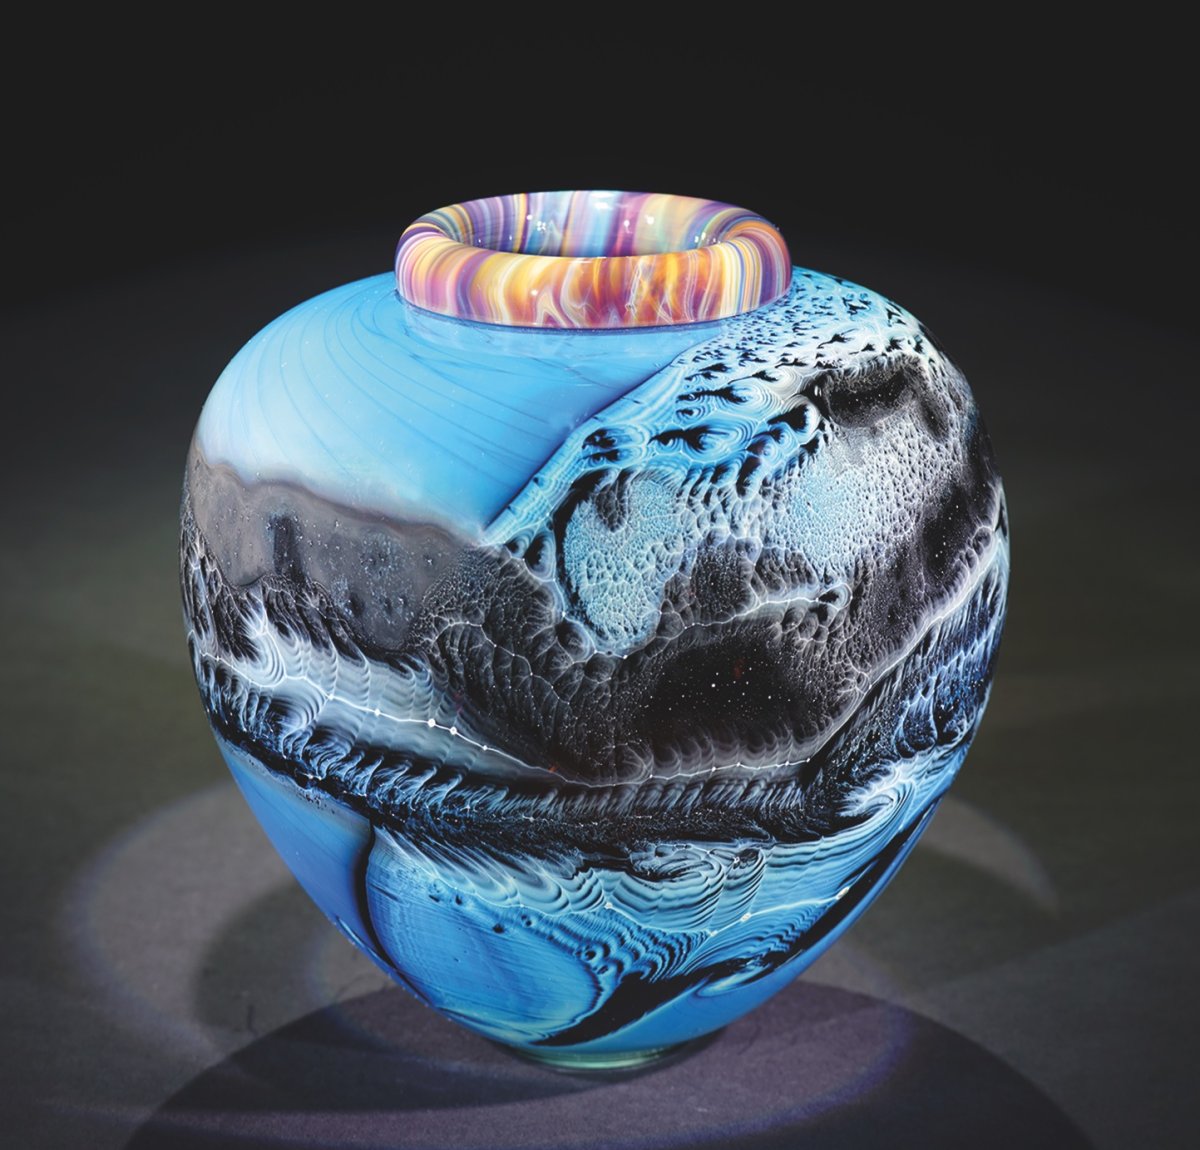 Vase with light blues, dark greys, blacks, leading to multiple colors around the top.